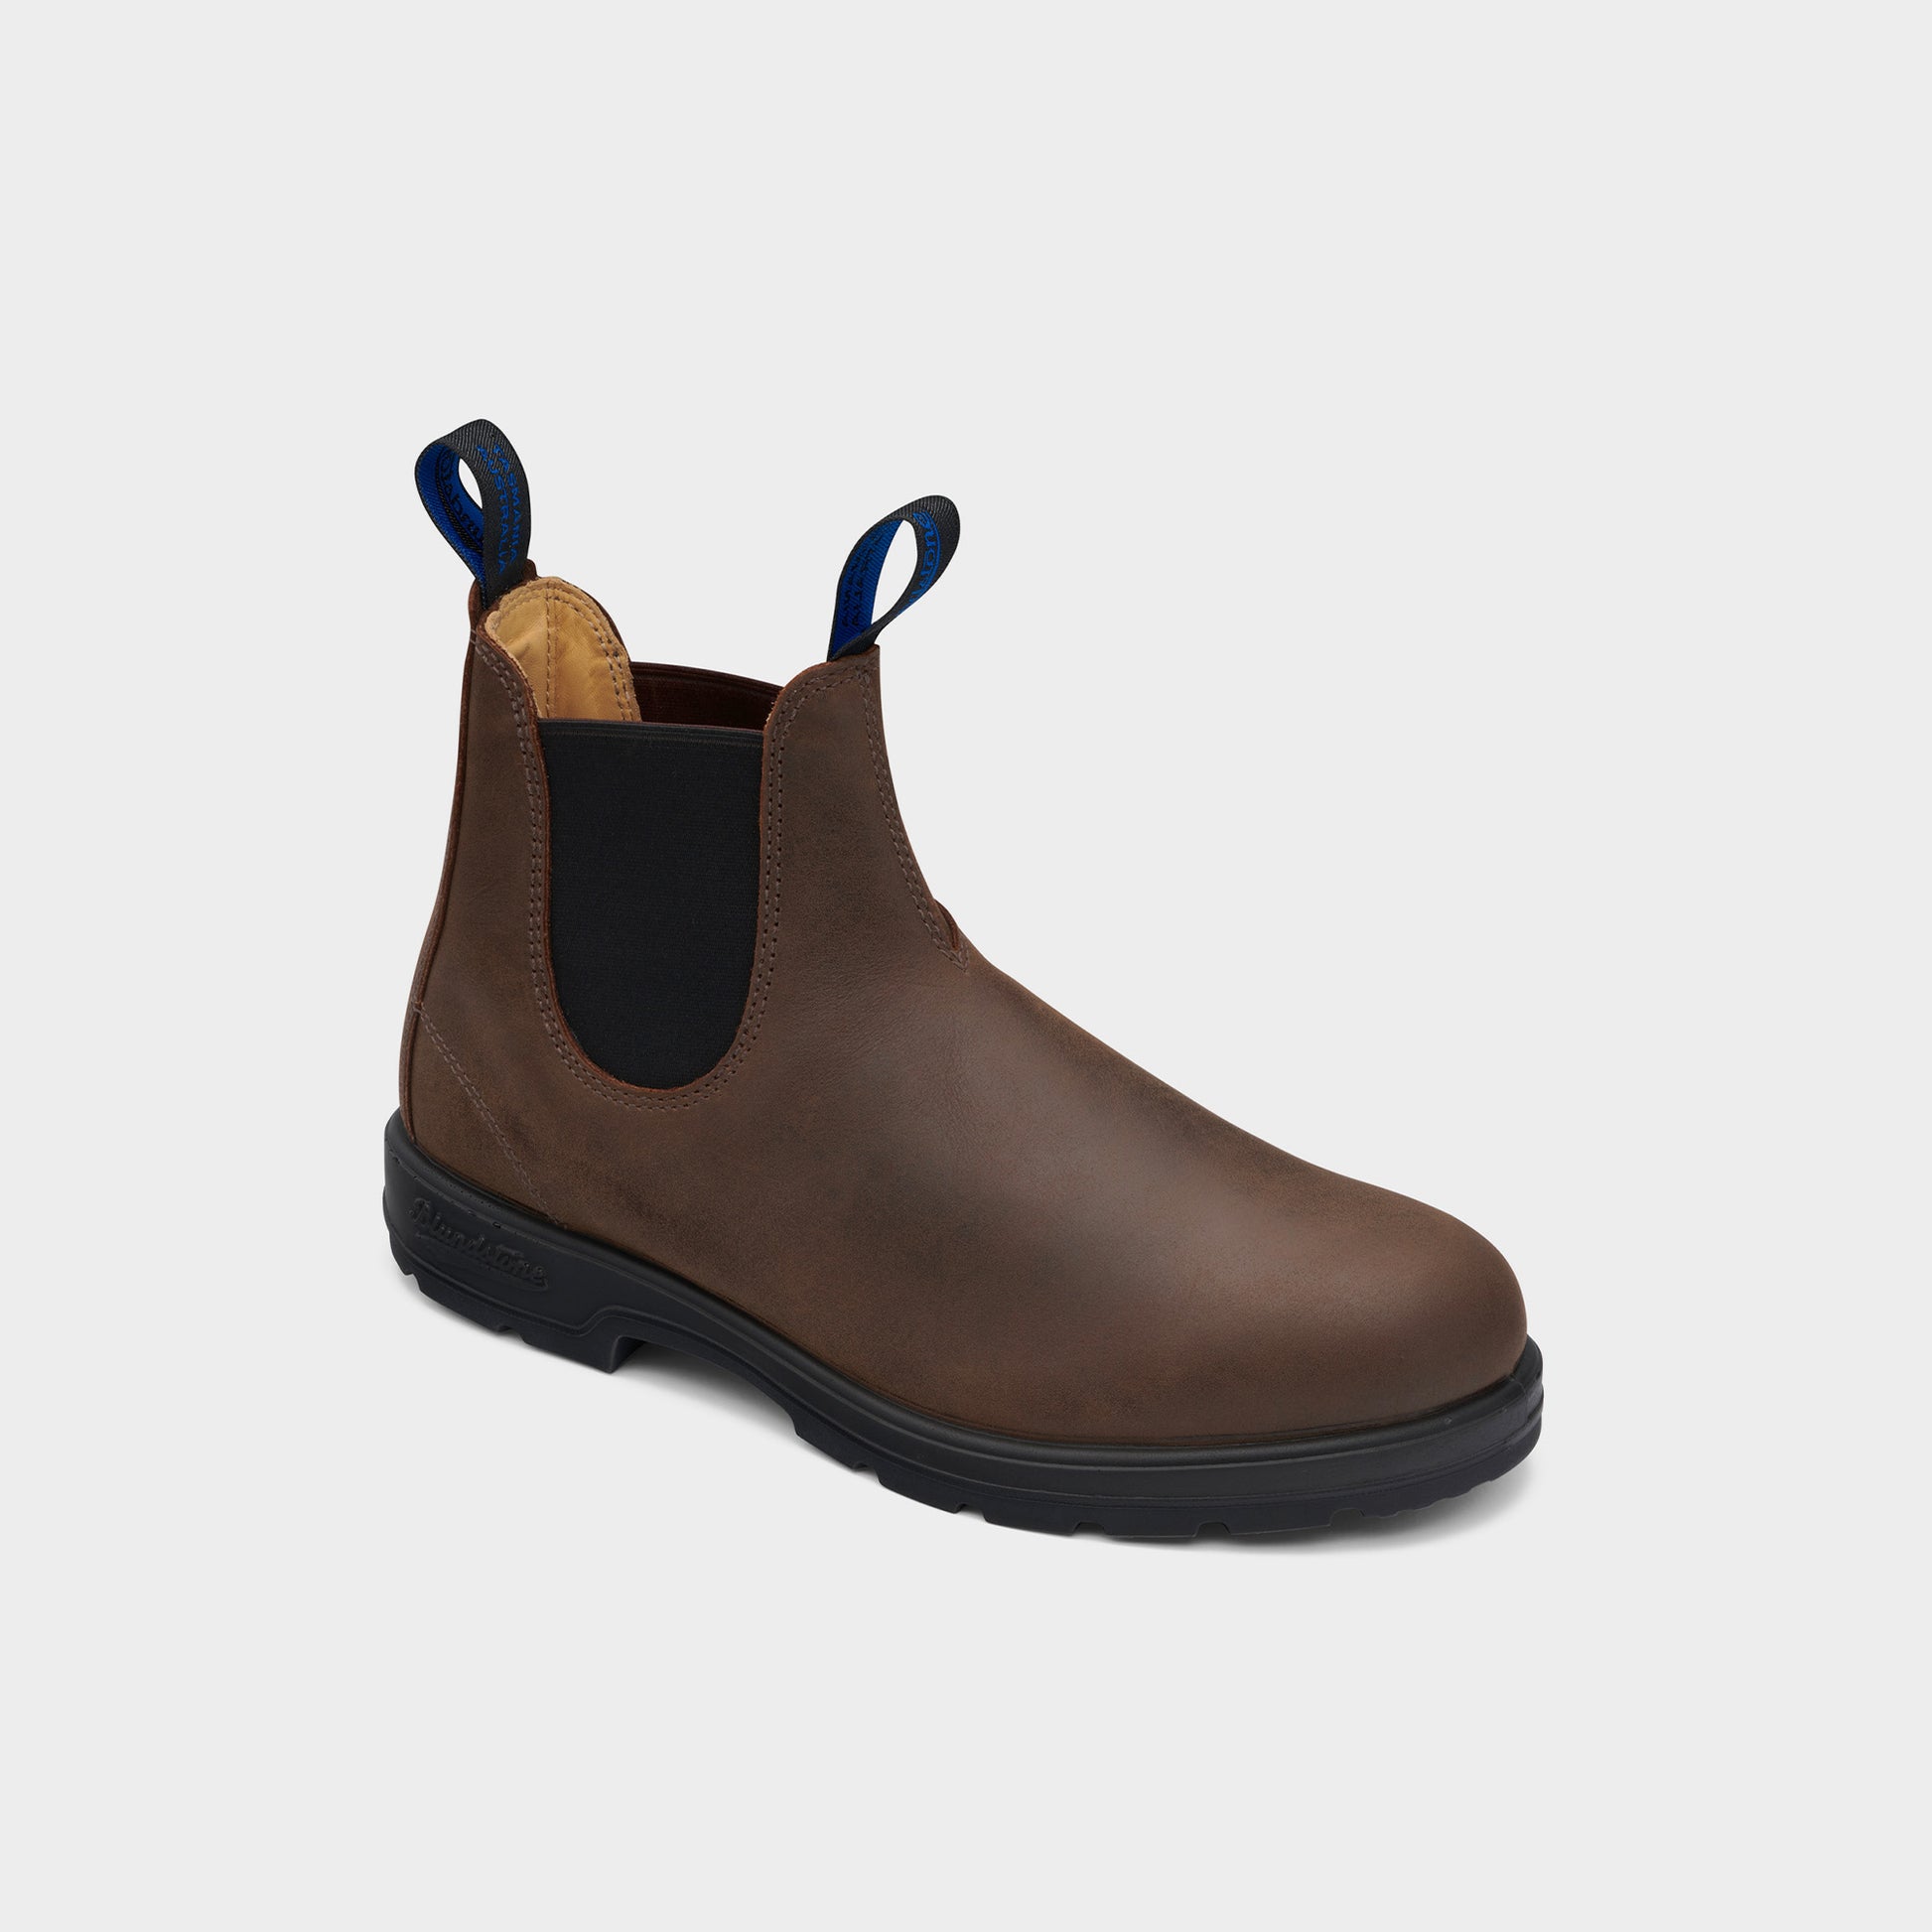 Blundstone 1477 Antique Brown in Farbe antique_brown